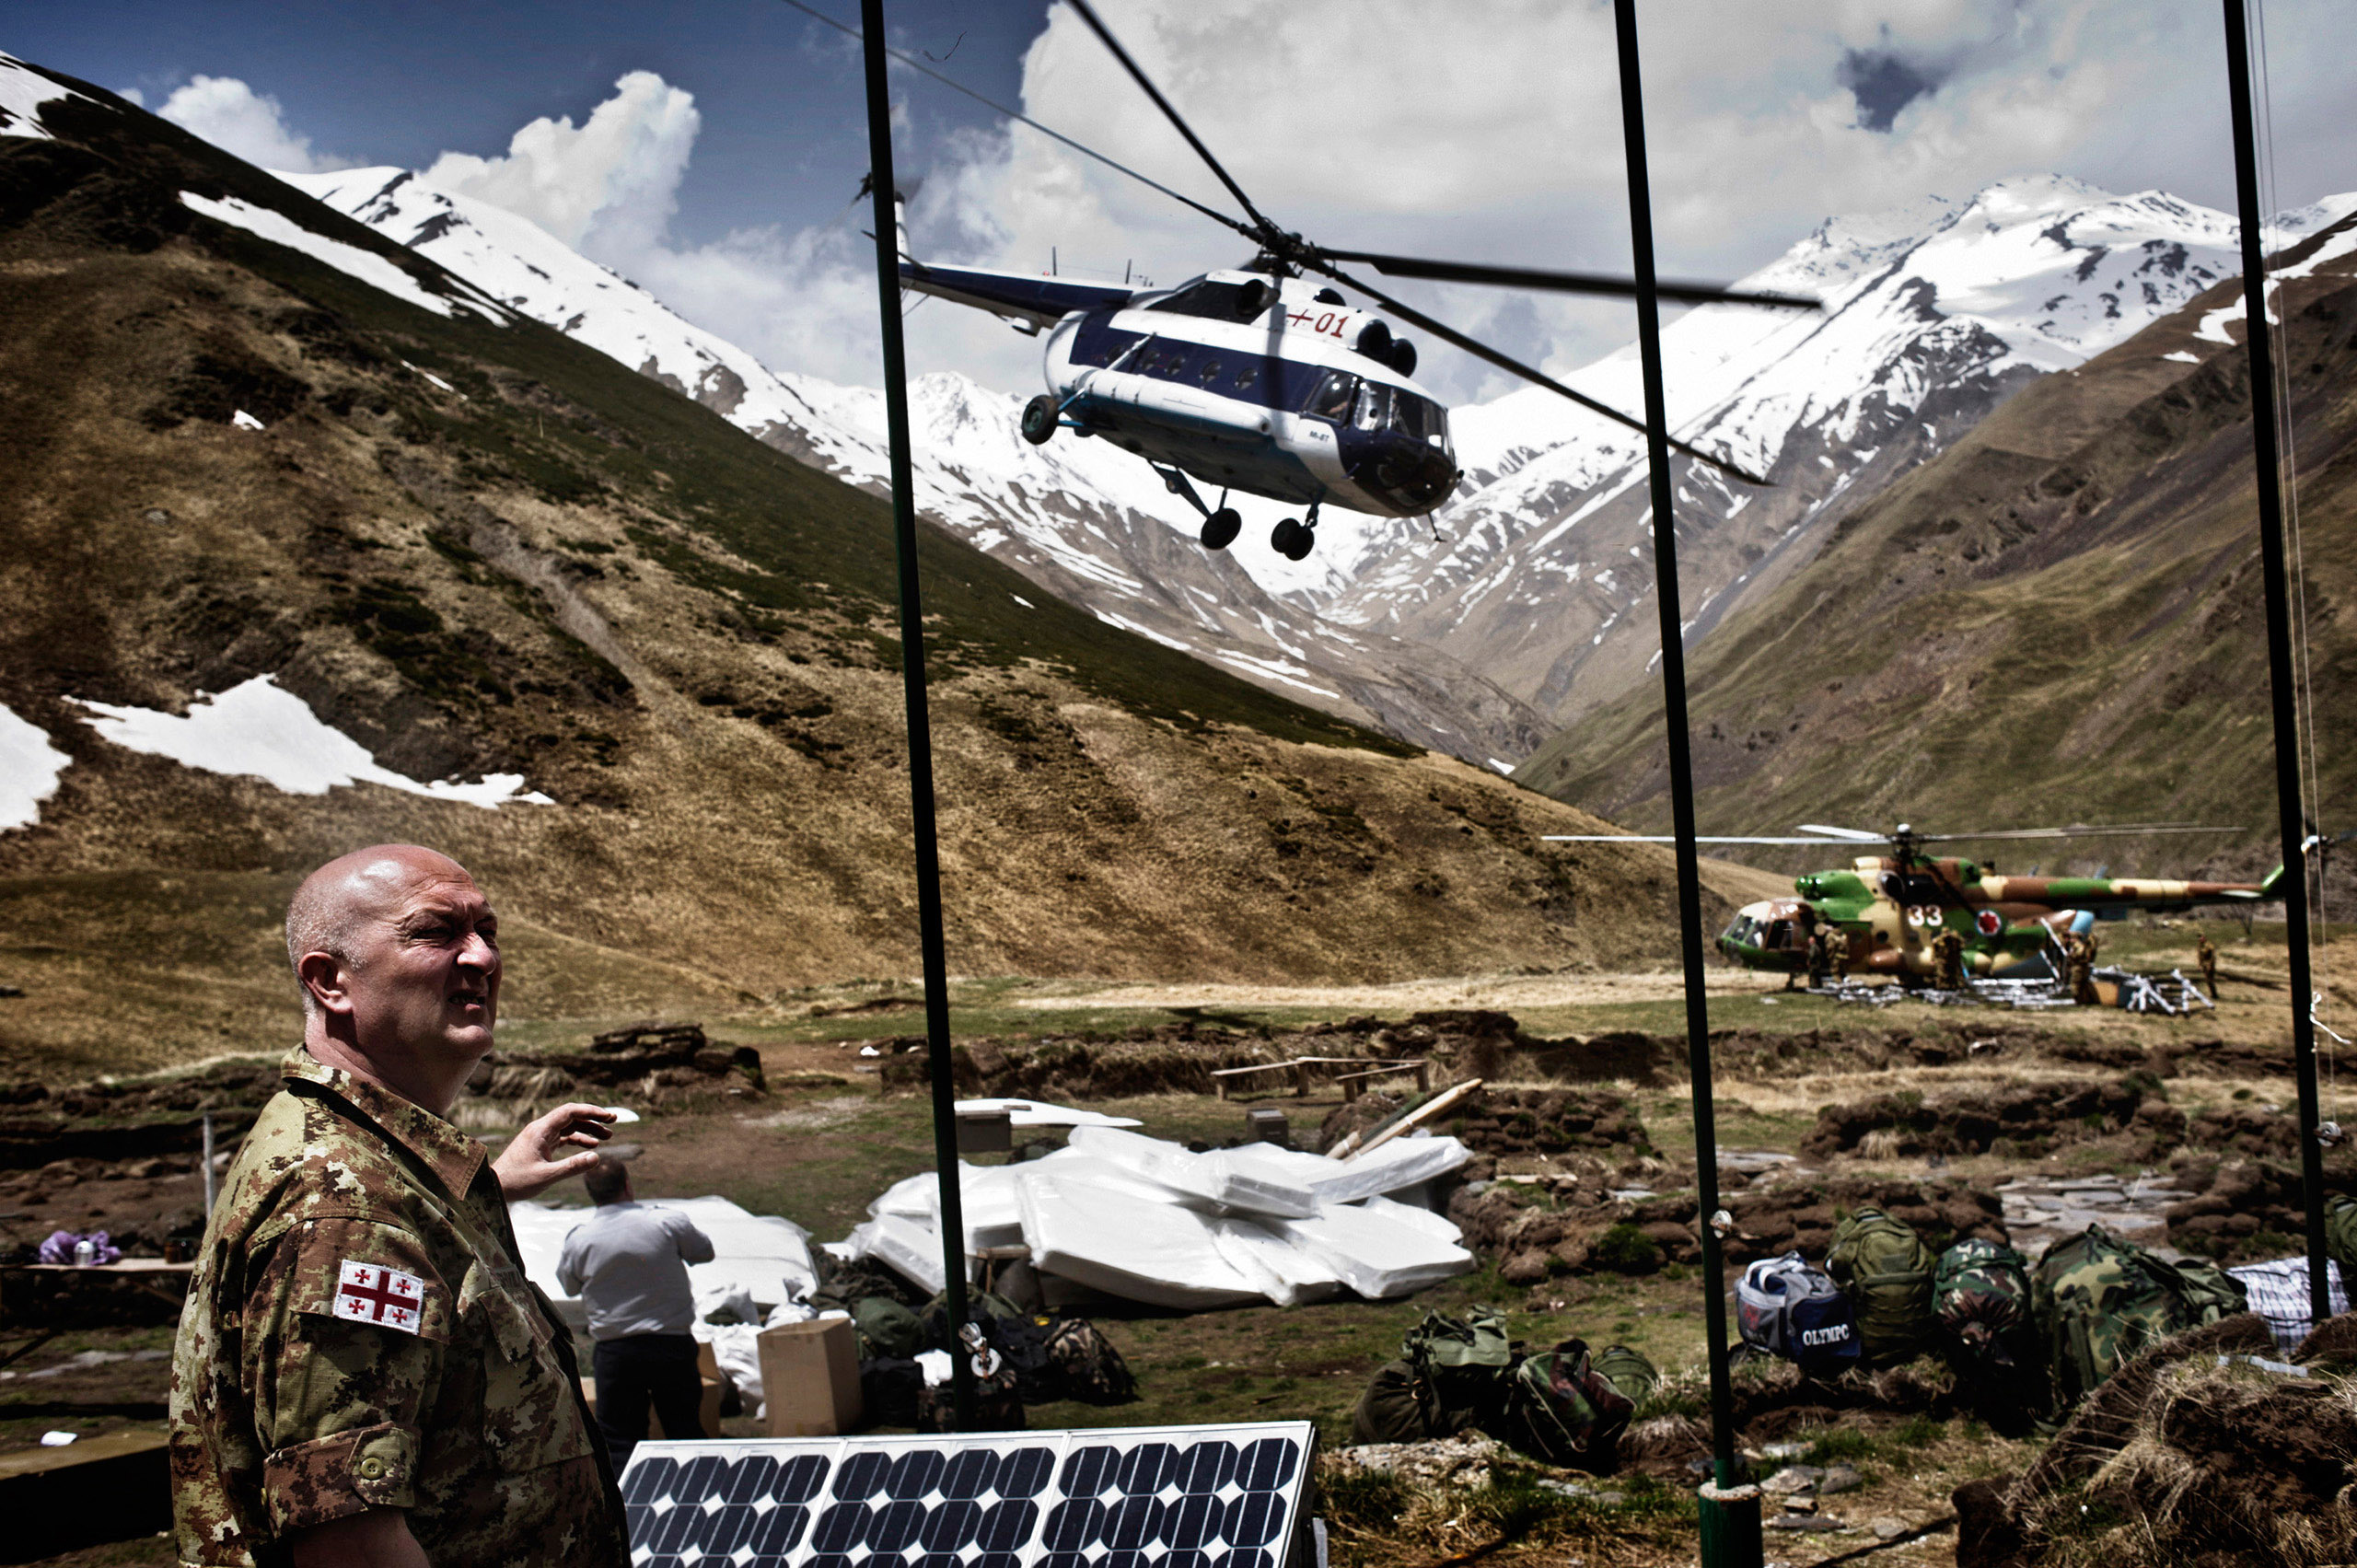 Border police patrol Georgia’s frontier with Russia in the eastern Caucasus, part of a nuclear smuggling route. (Yuri Kozyrev—Noor for TIME)